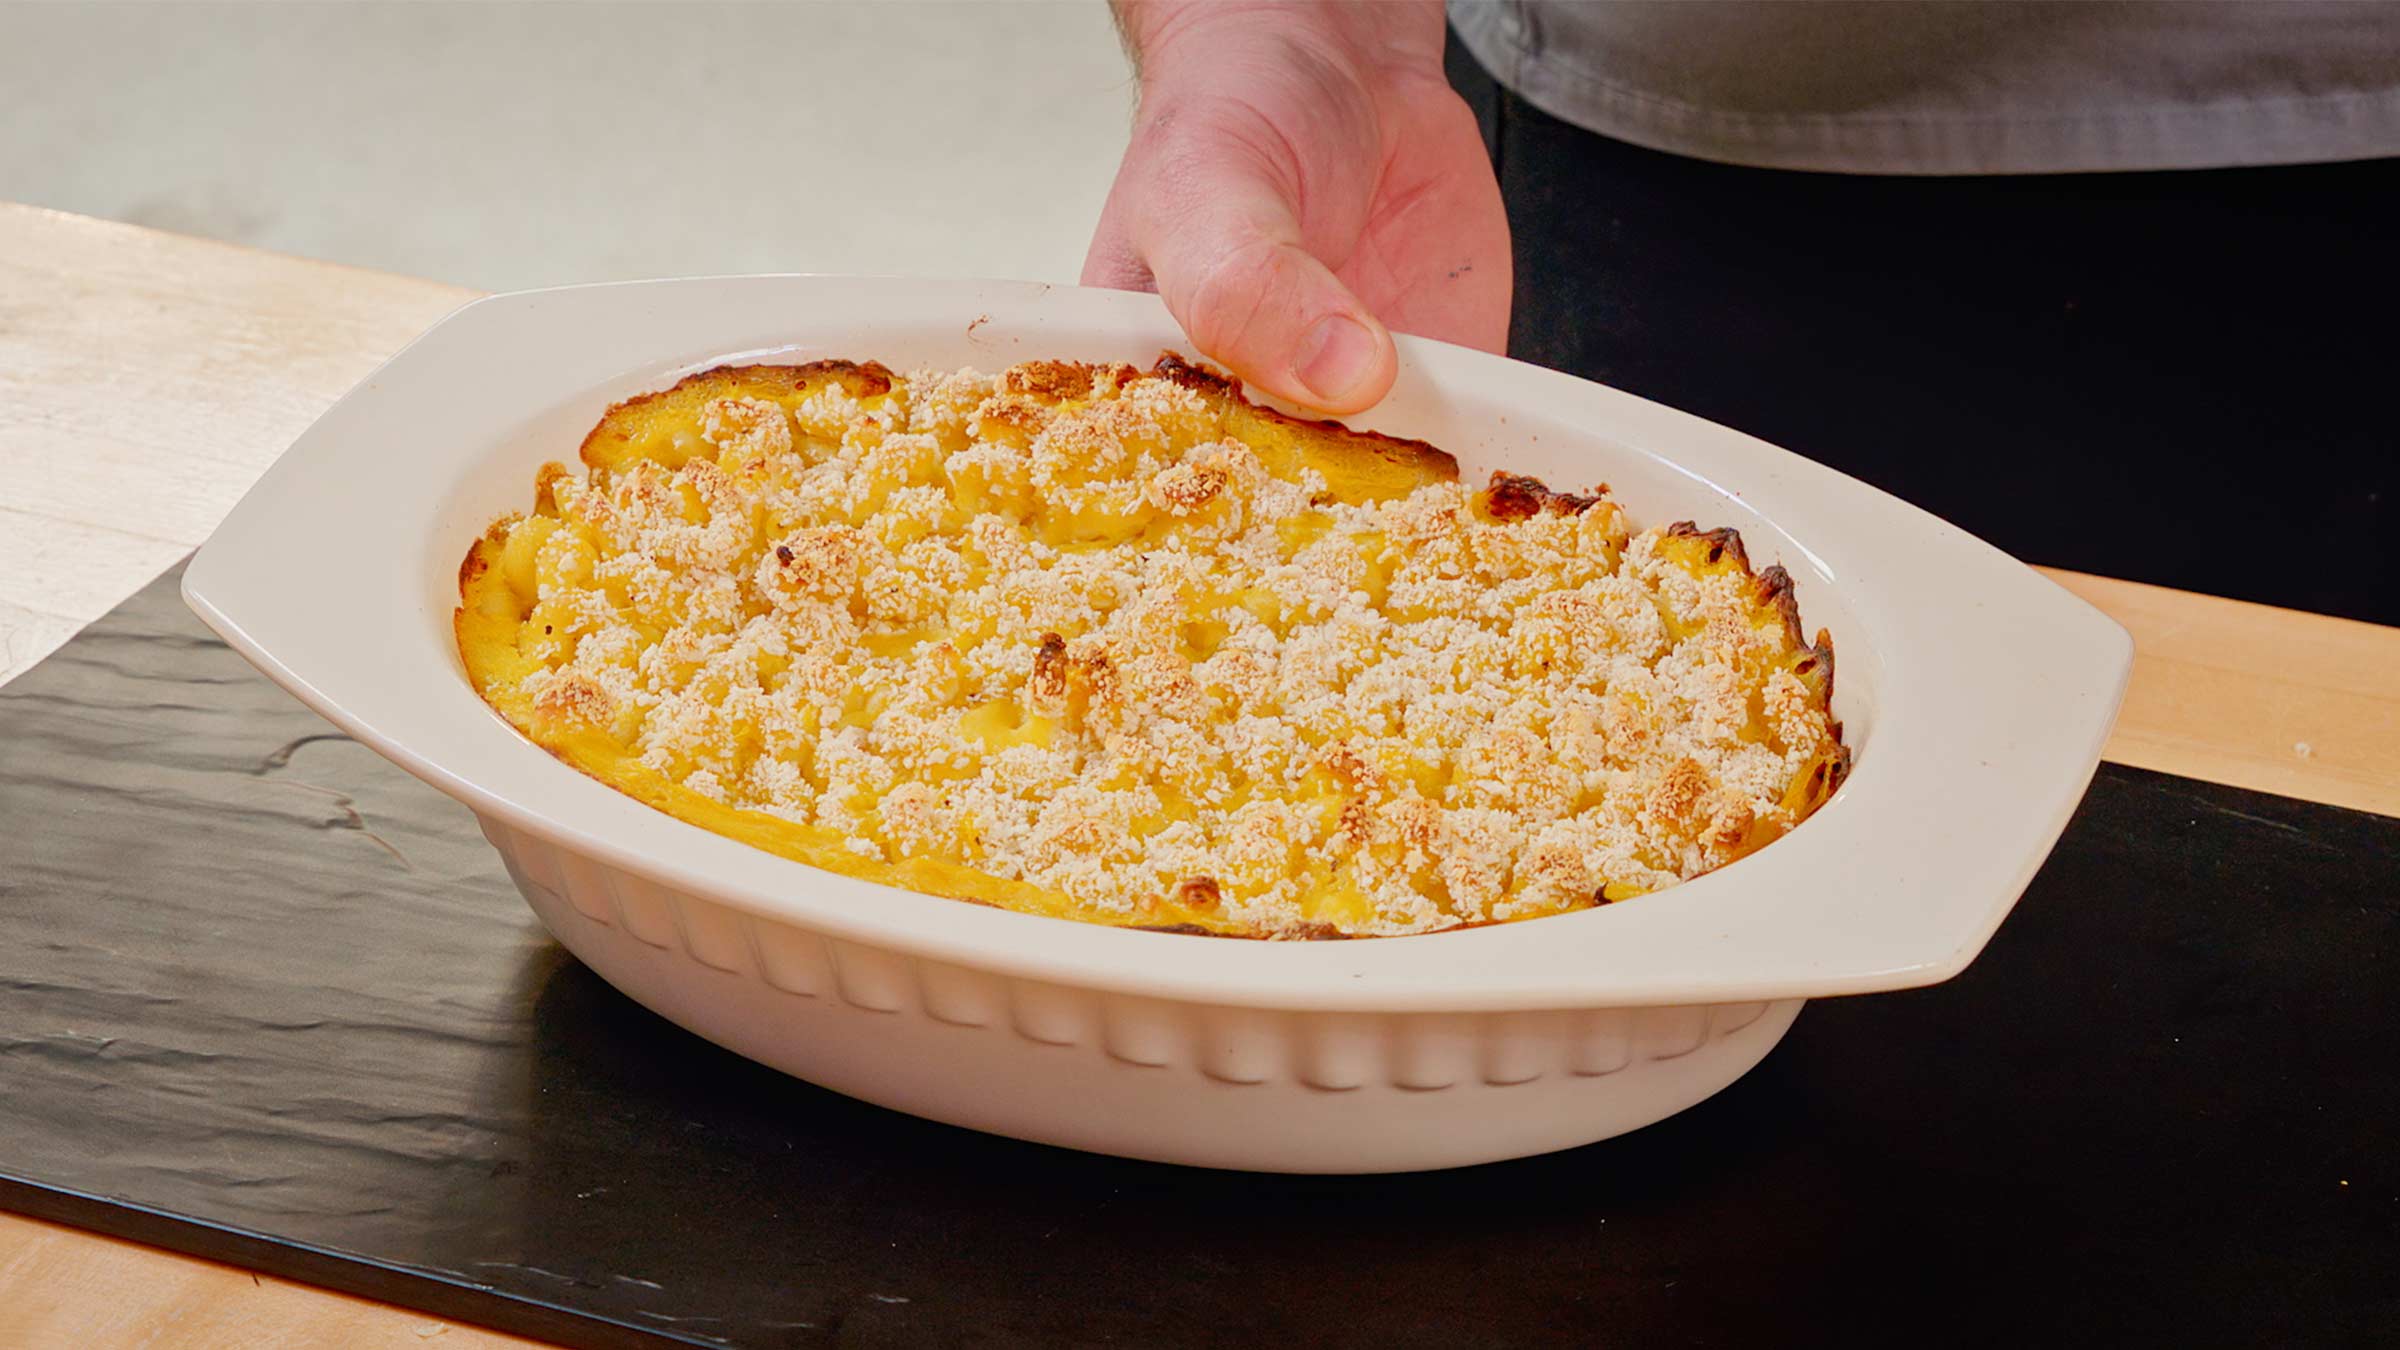 Recipe from our chefs: Butternut squash mac & cheese